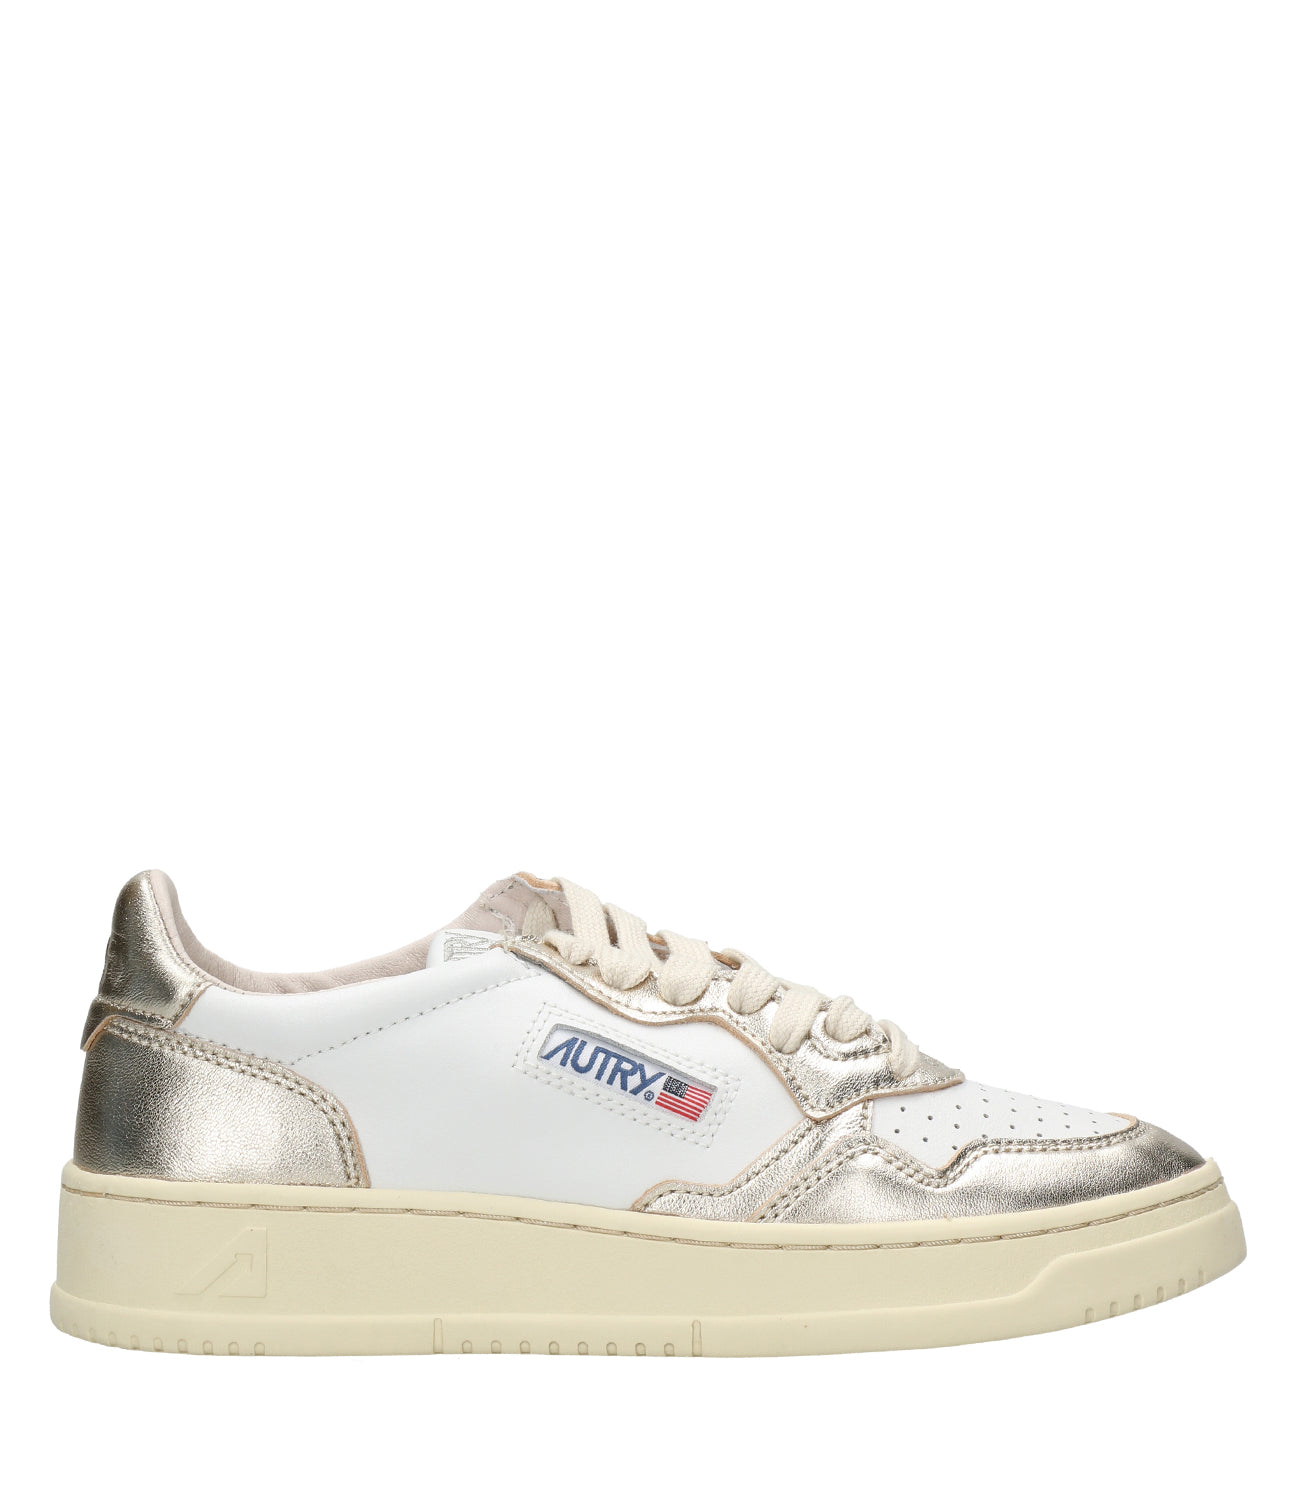 Autry | Sneakers Medalist Low Bianca e Platino